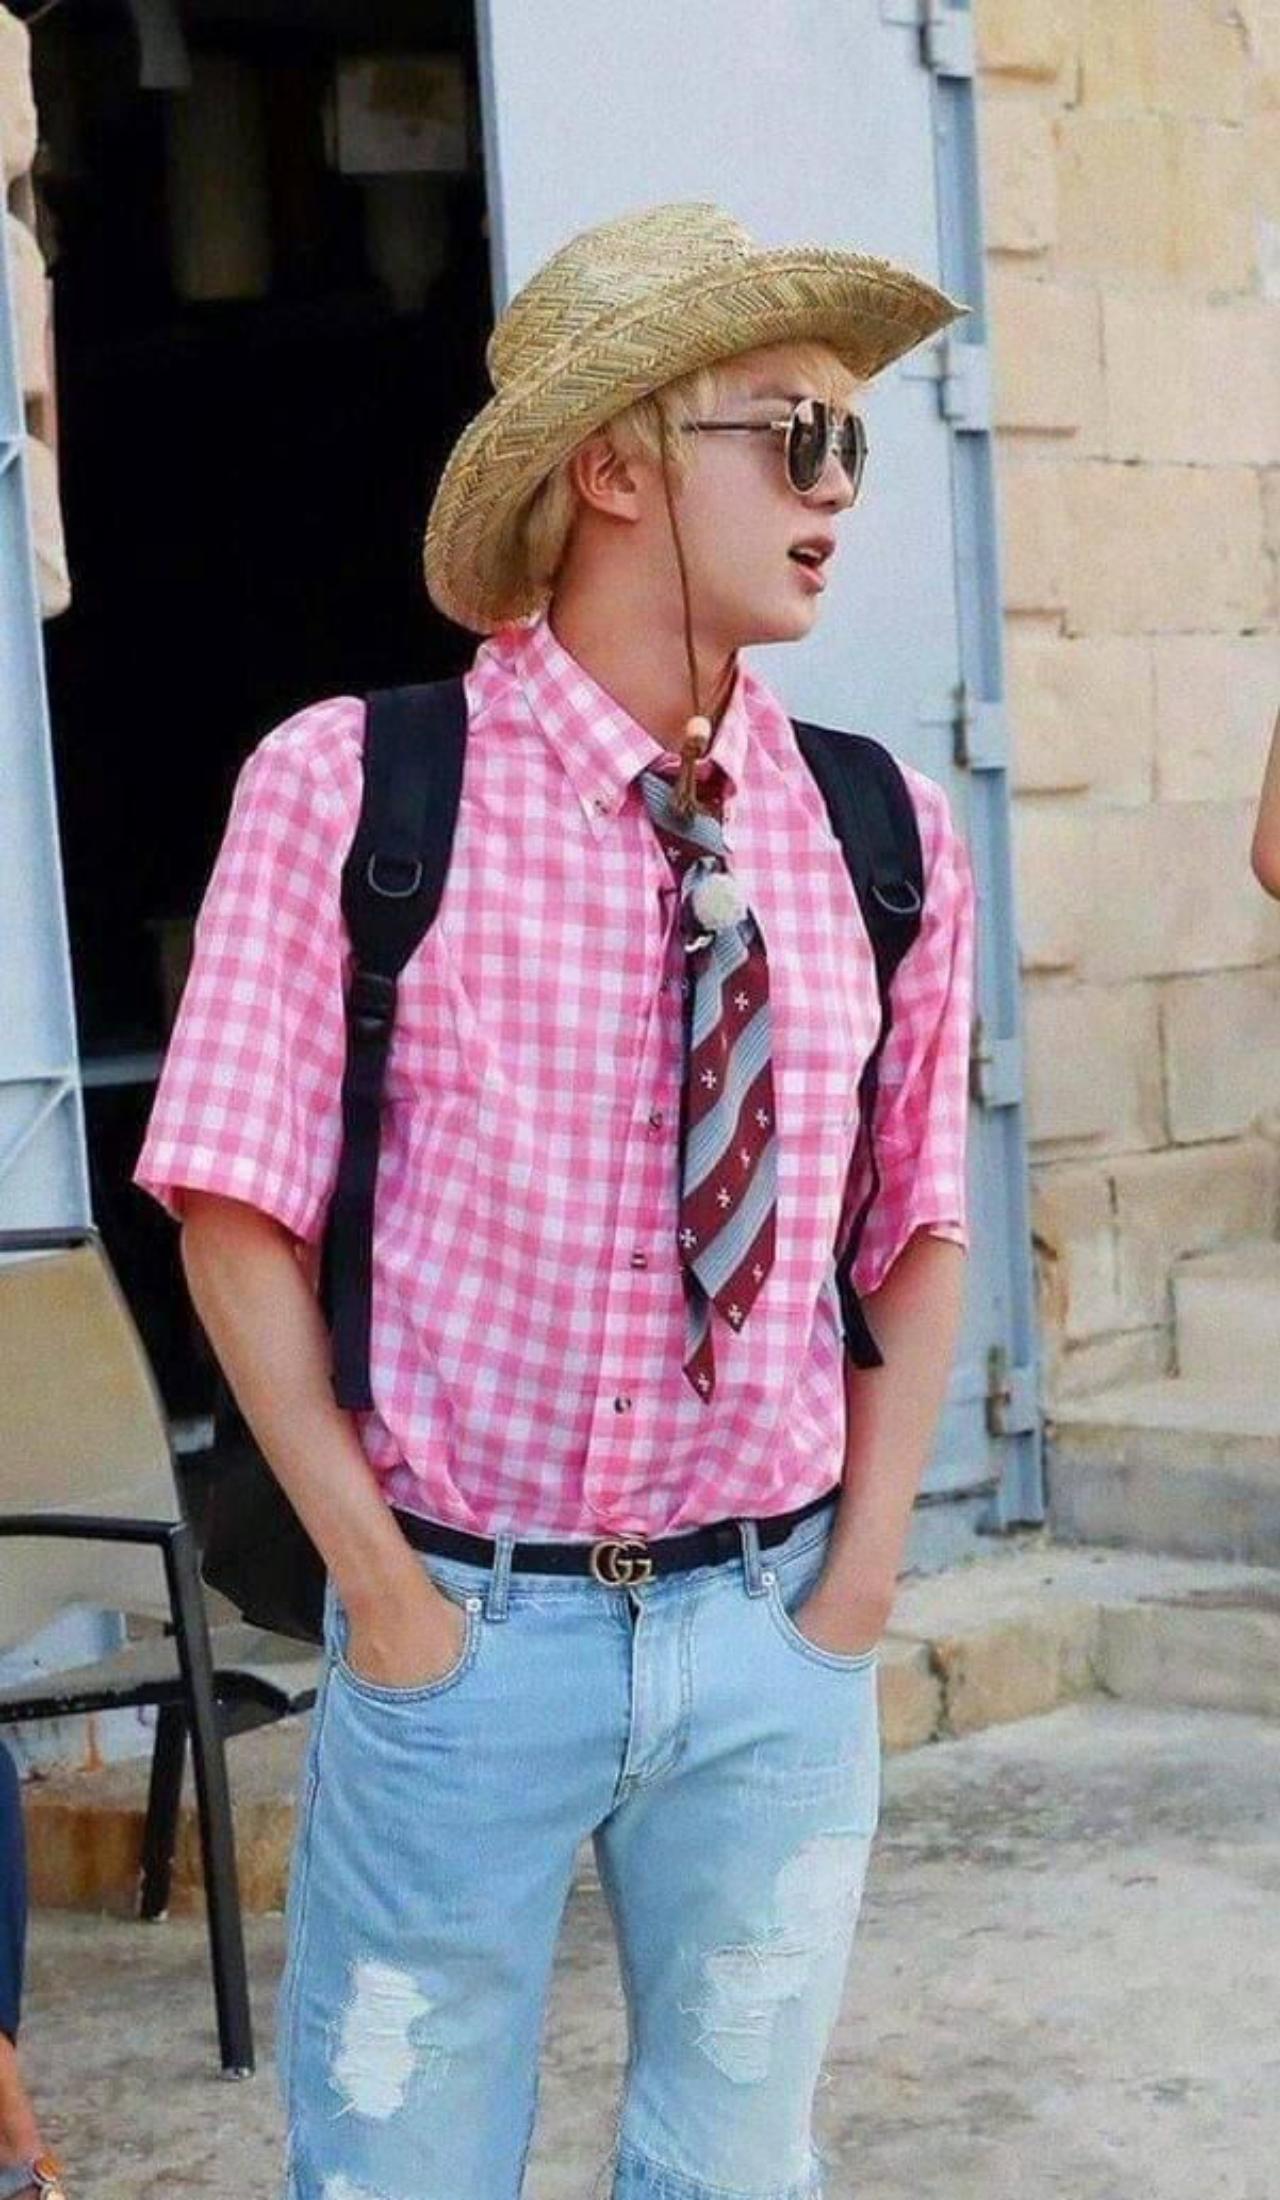 Jin is the maestro of putting together the most eclectic ensembles. During BTS's Malta trip, Jin paired a formal pink checkered shirt with a tie, a hat and a pair of jean shorts (made DIY style by cutting - yes you heard that right - a pair of perfectly good jeans). No wonder J-Hope was a little embarrassed of him